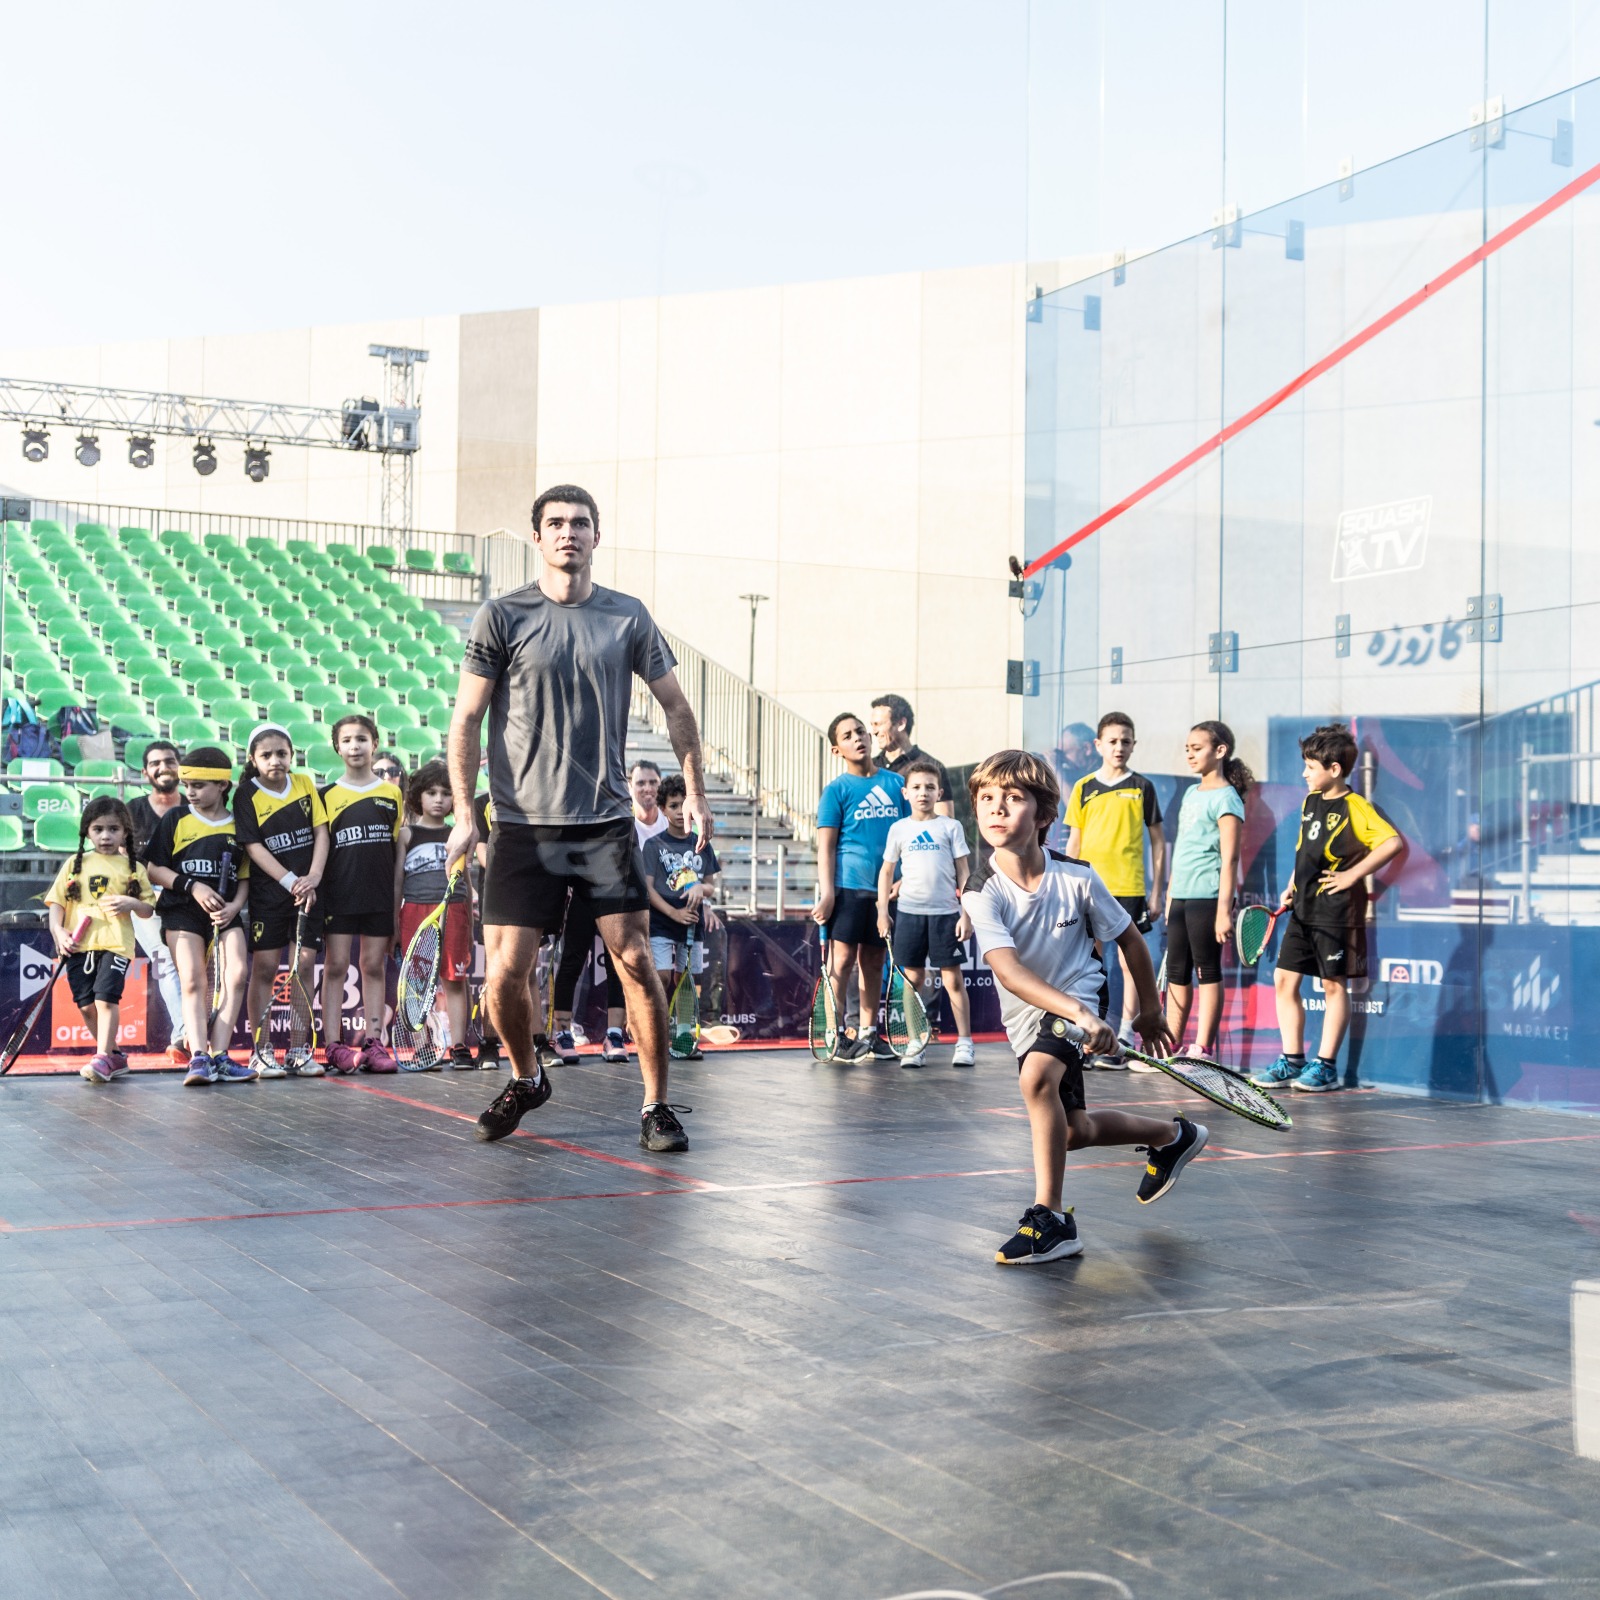 A group of children stood behind a professional male squash player and a young boy playing squash in an outdoor squash court